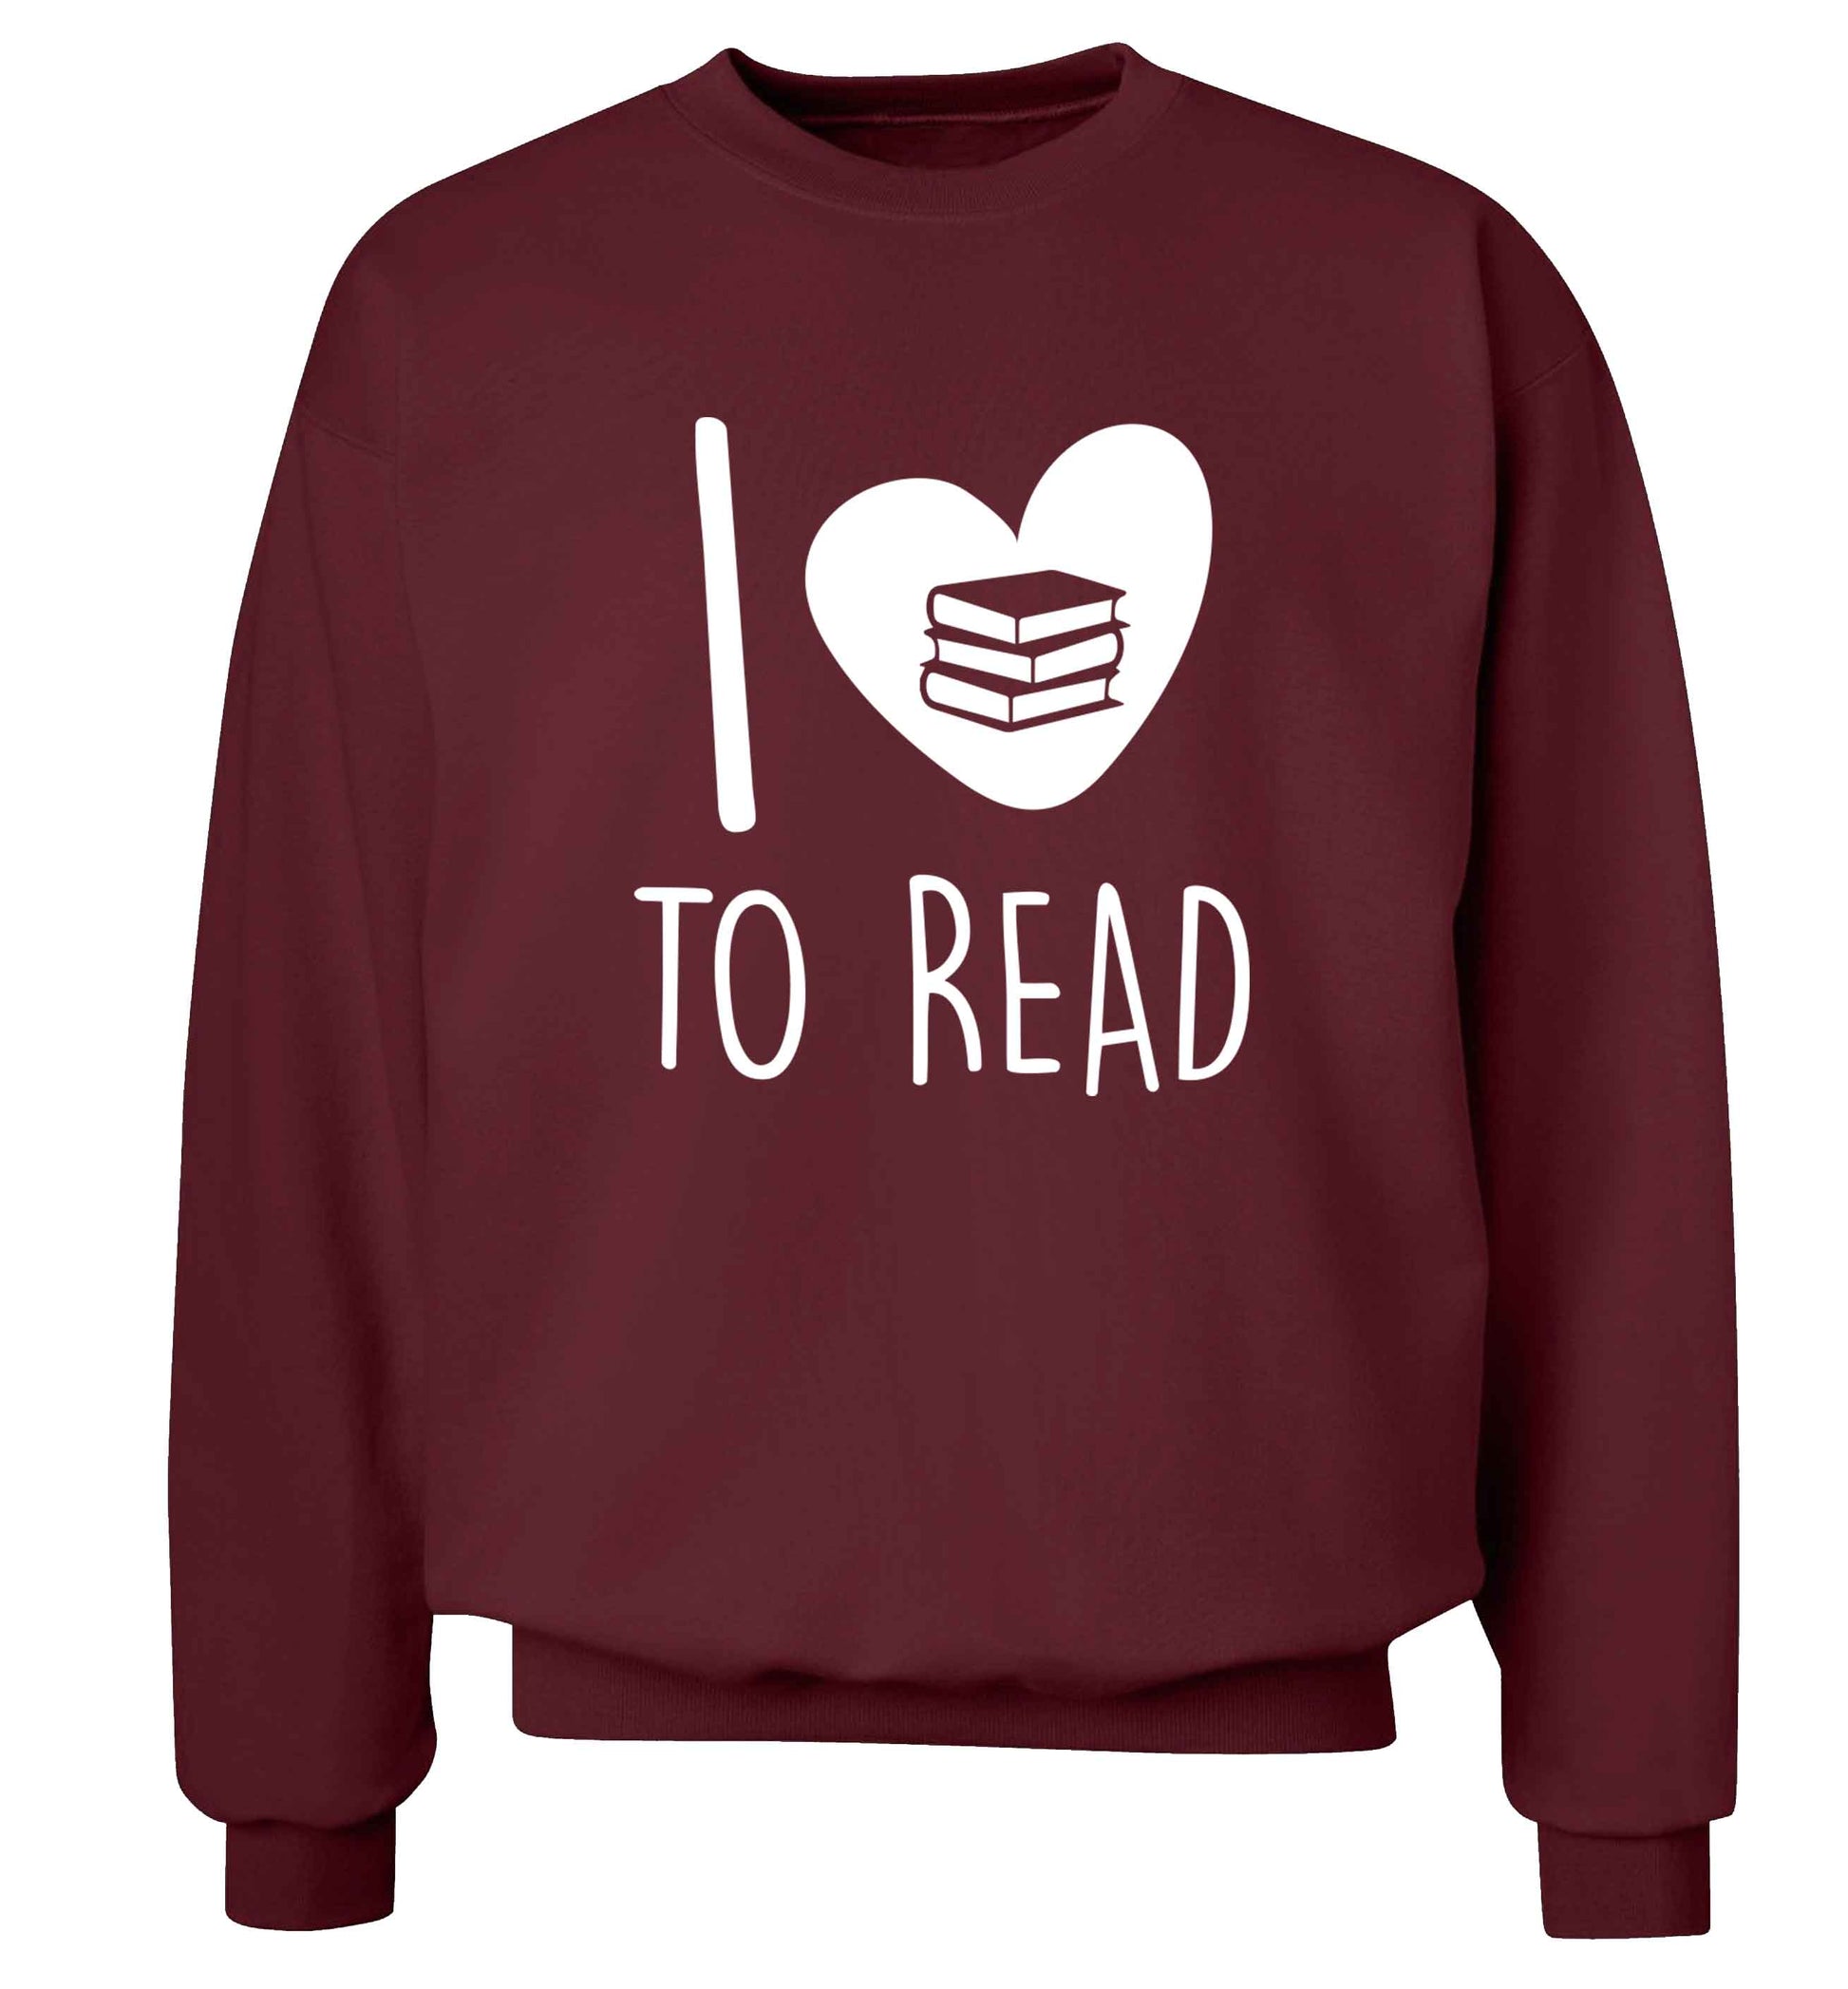 I love to read Adult's unisex maroon Sweater 2XL